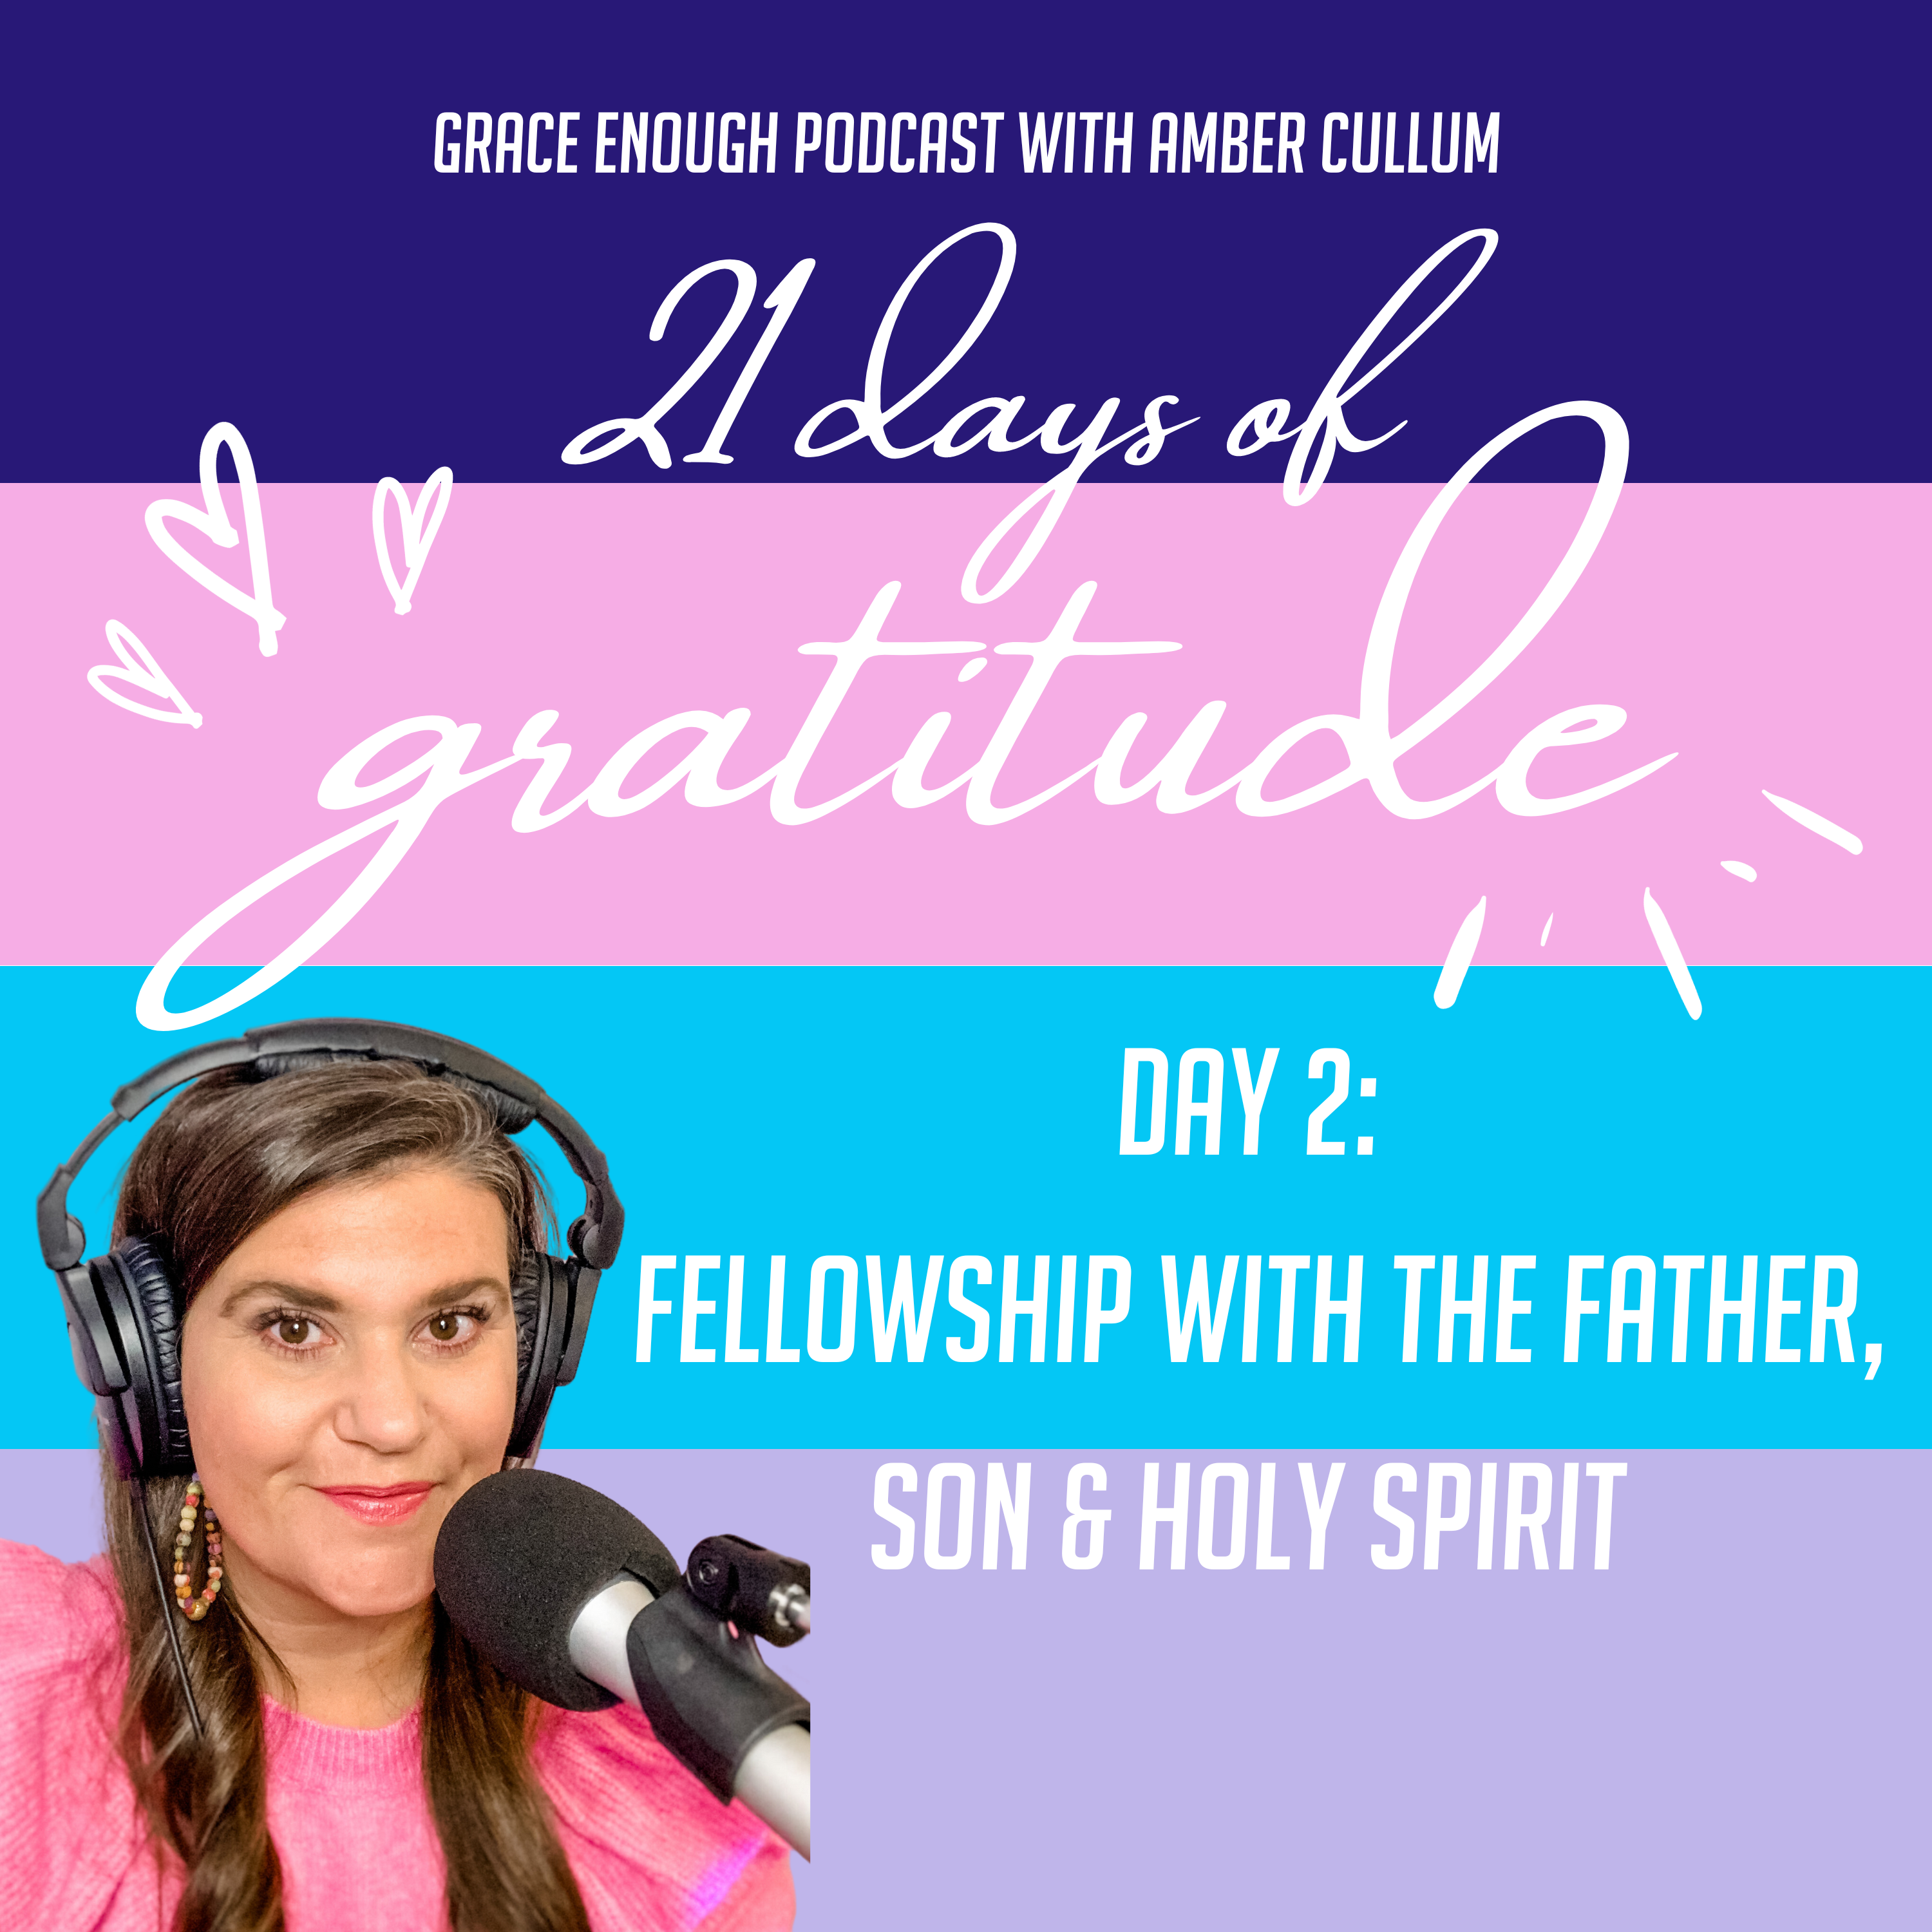 21 Days of Gratitude: Day 2, Fellowship with the Father, Son and Holy Spirit